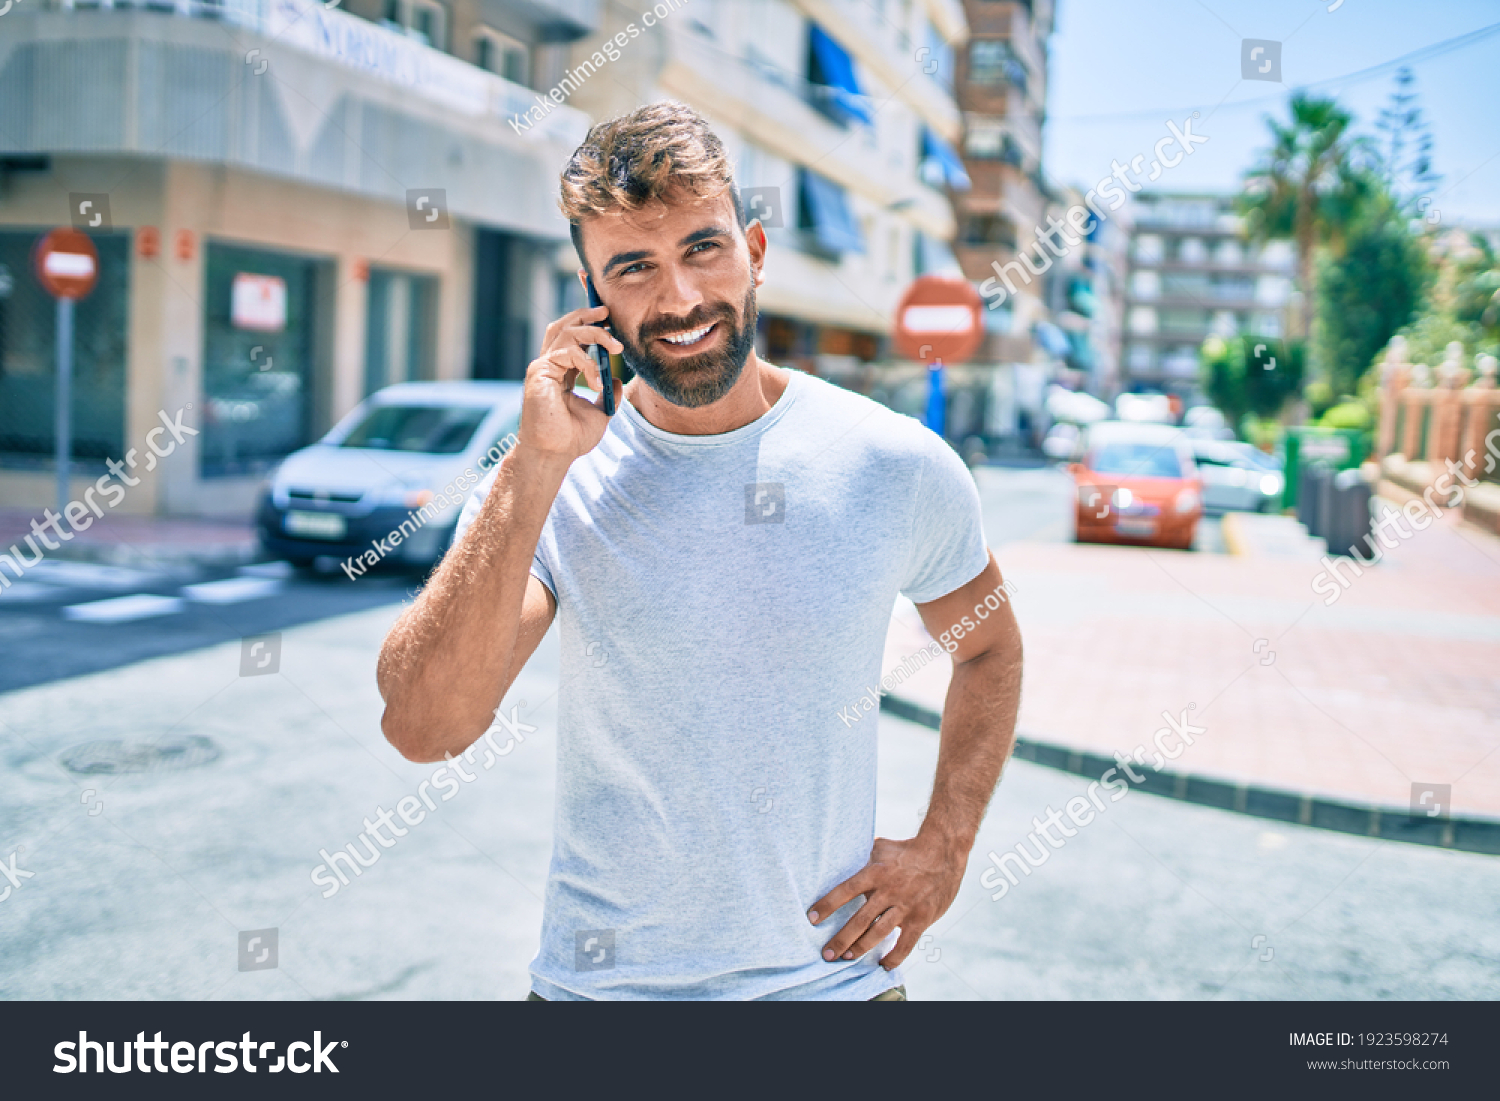 8-076-318-lifestyle-man-images-stock-photos-and-amp-vectors-or-shutterstock